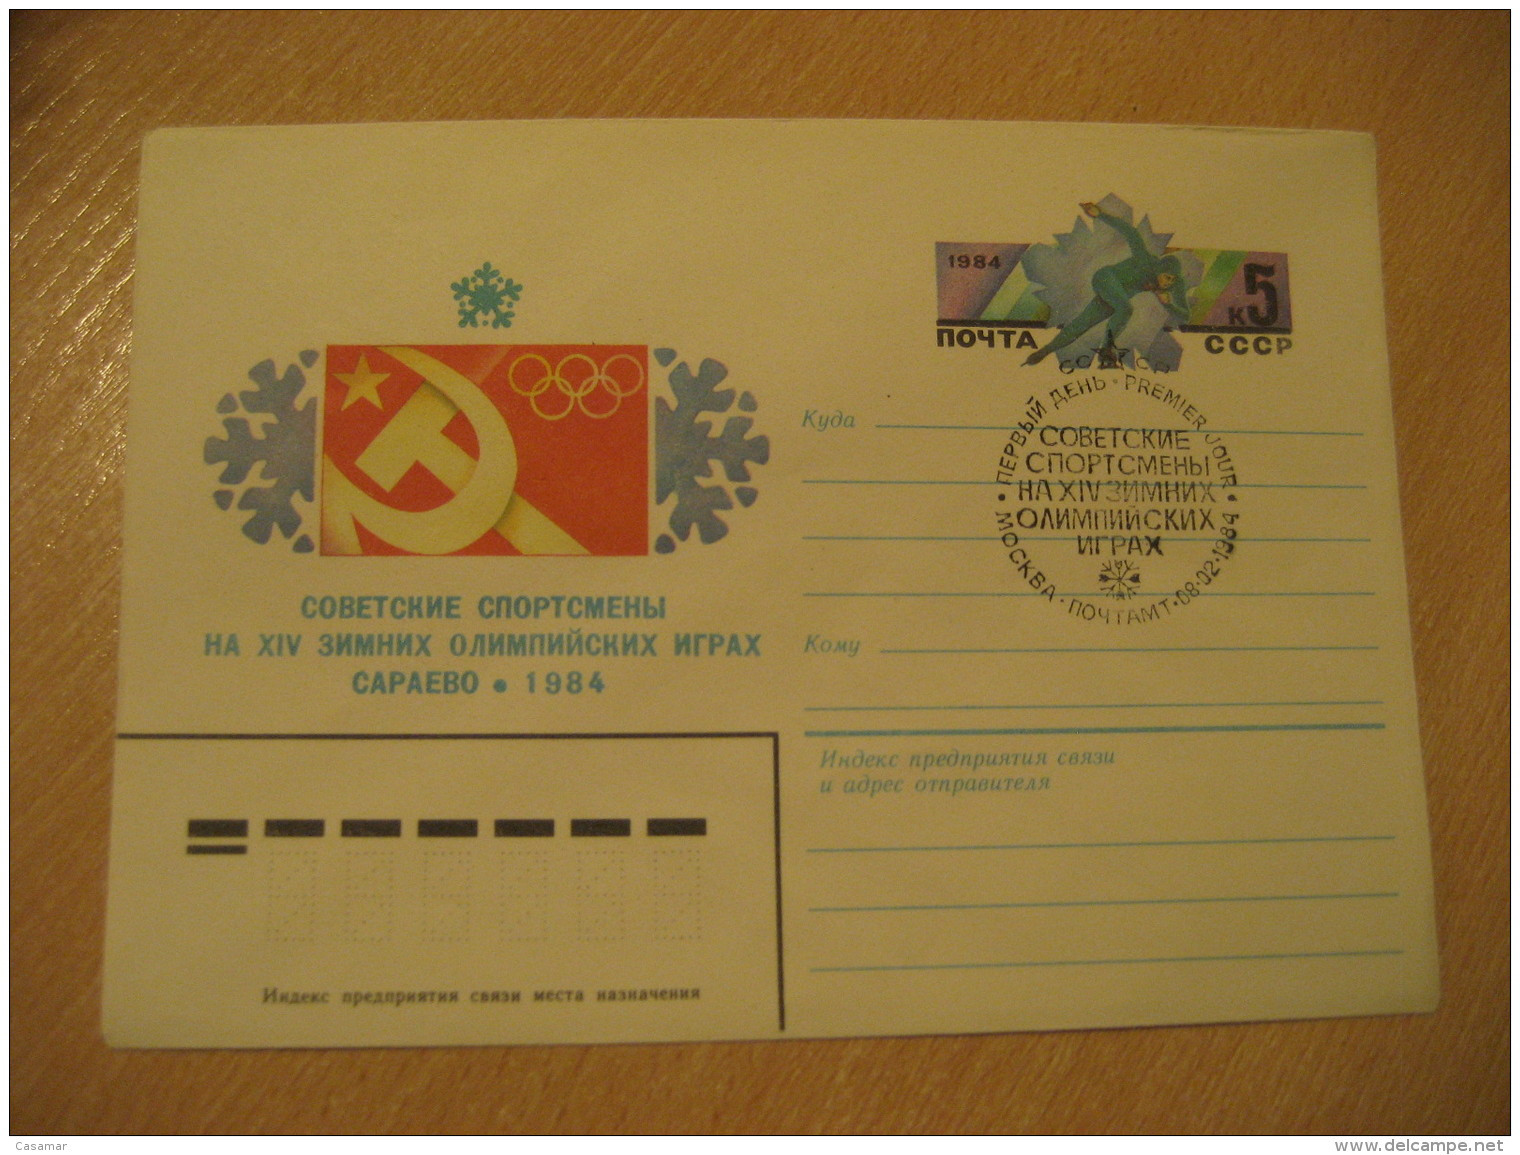 RUSSIA 1984 Olympic Games Olympics Speed Skating On Ice Patinage De Vitesse Sur Glace Postal Stationery Cover USSR CCCP - Patinage Artistique